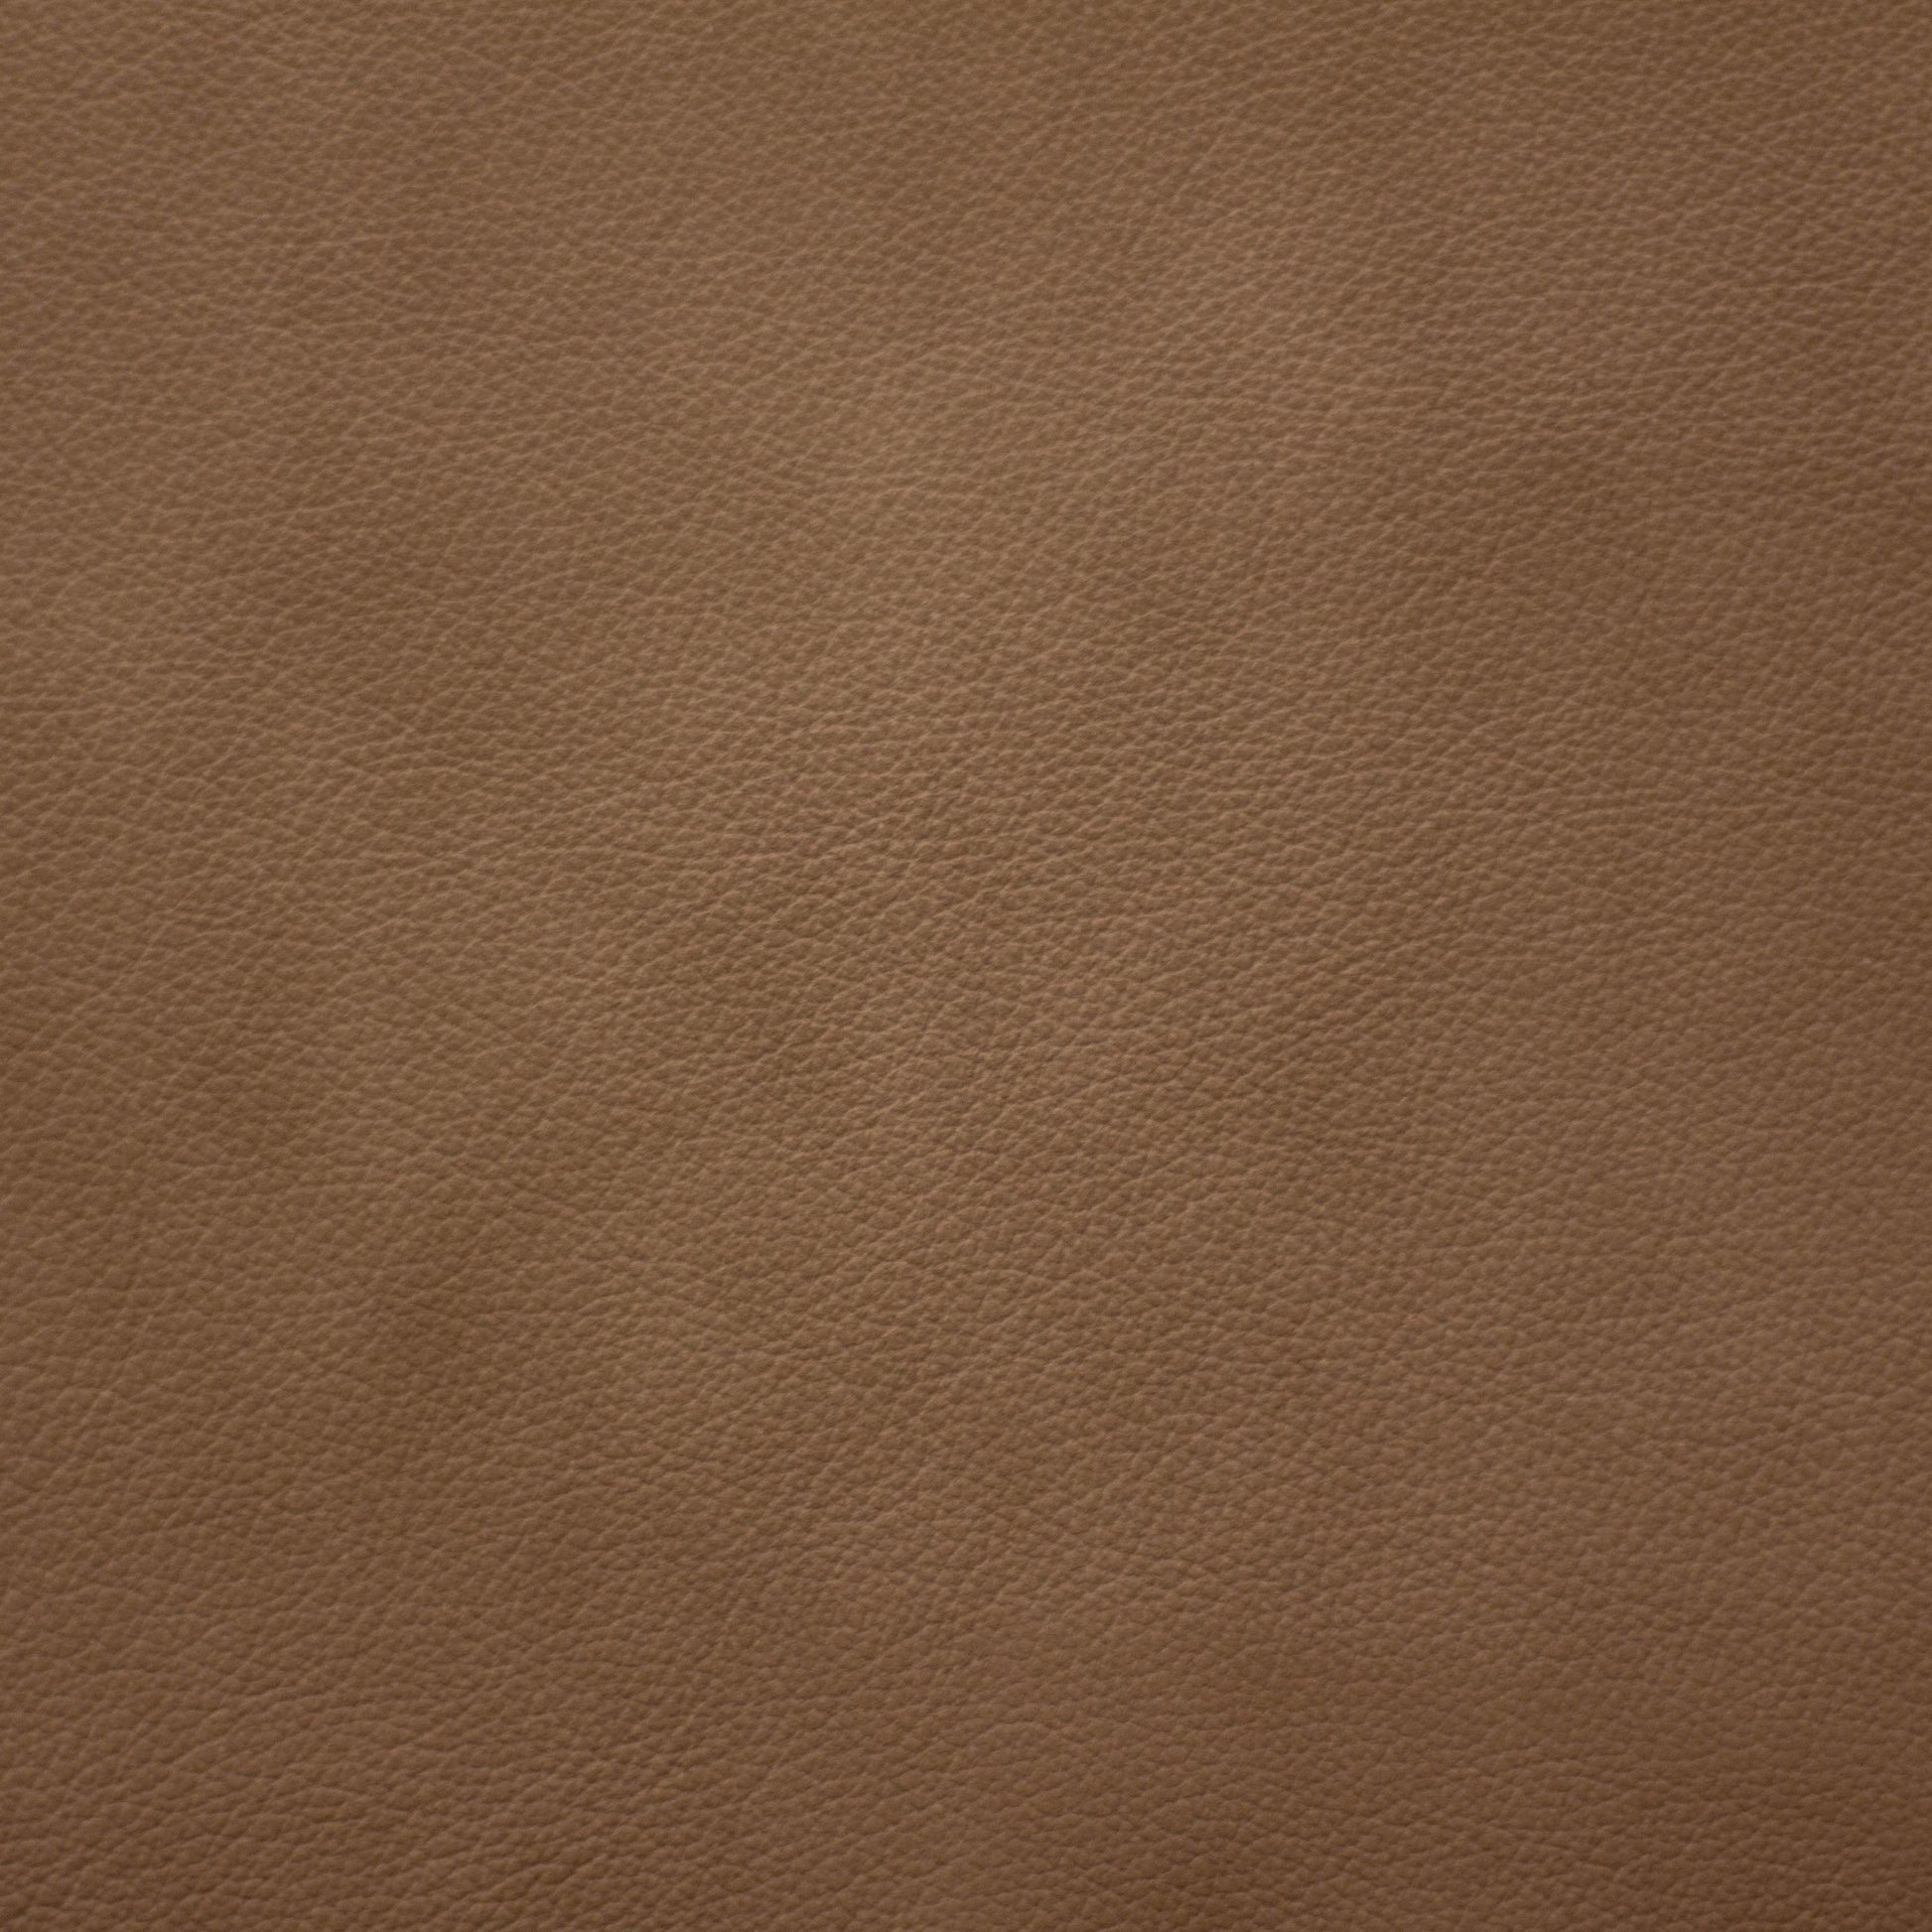 Trattoria, Fontina, Spilltop® Water Resistance, Hospitality Leather Hide